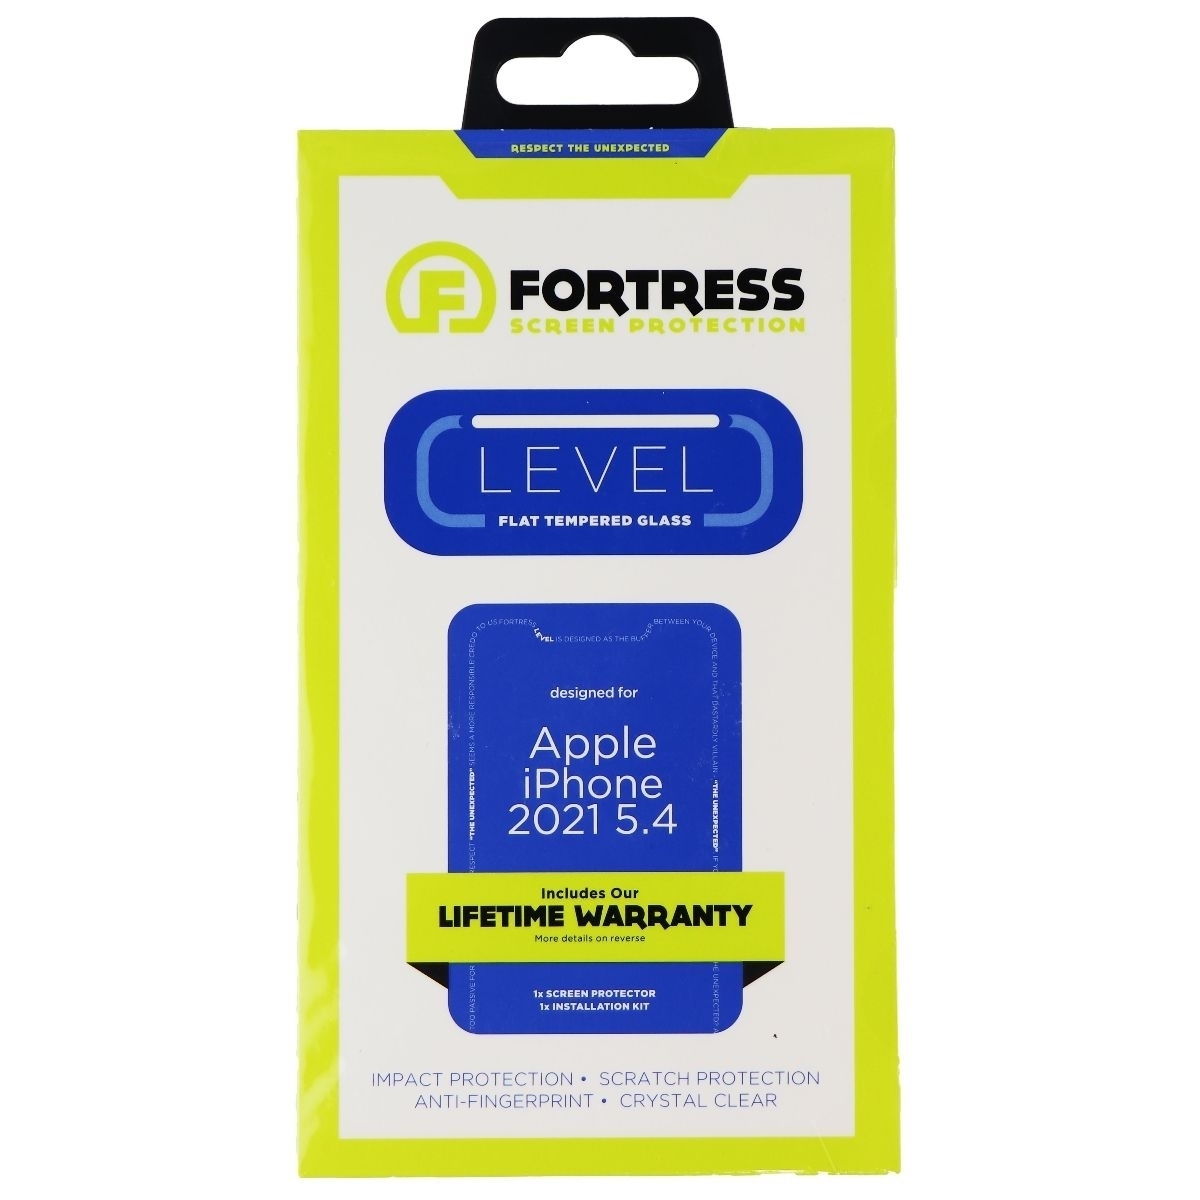 Fortress Screen Protector Premium Tempered Glass For IPhone 13 Mini - Clear